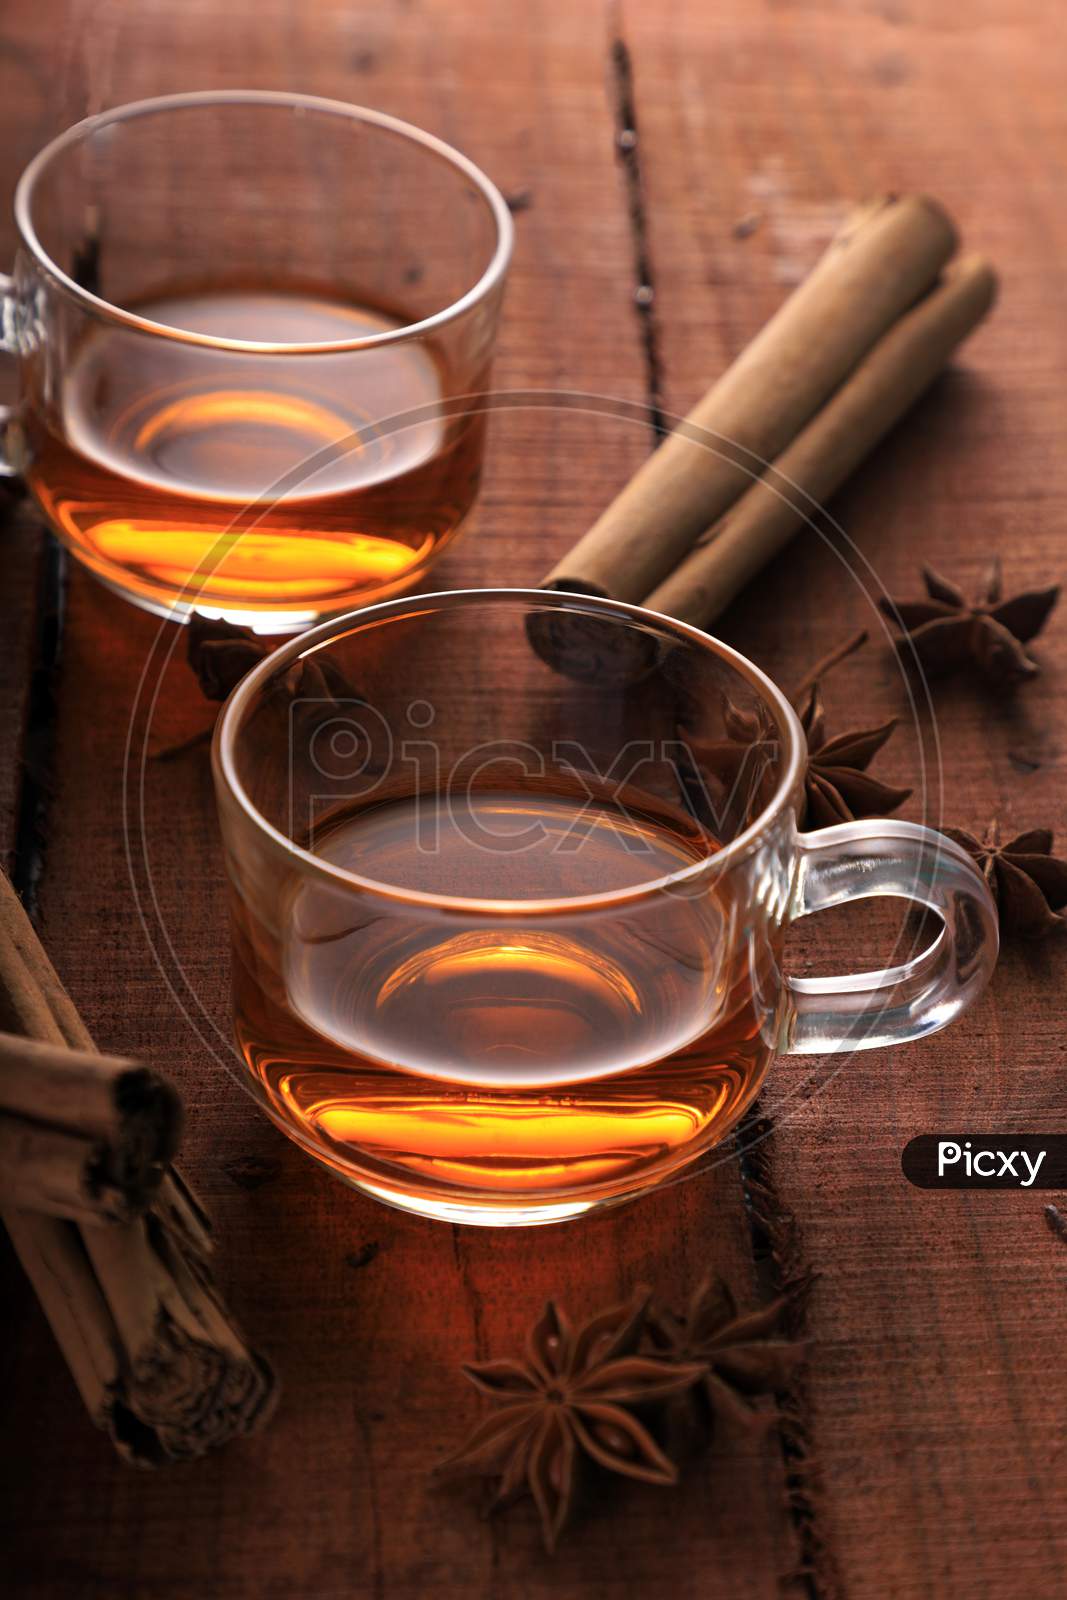 Herbal Tea With Star Anise And Cinnamon In A Cup On Wooden Table